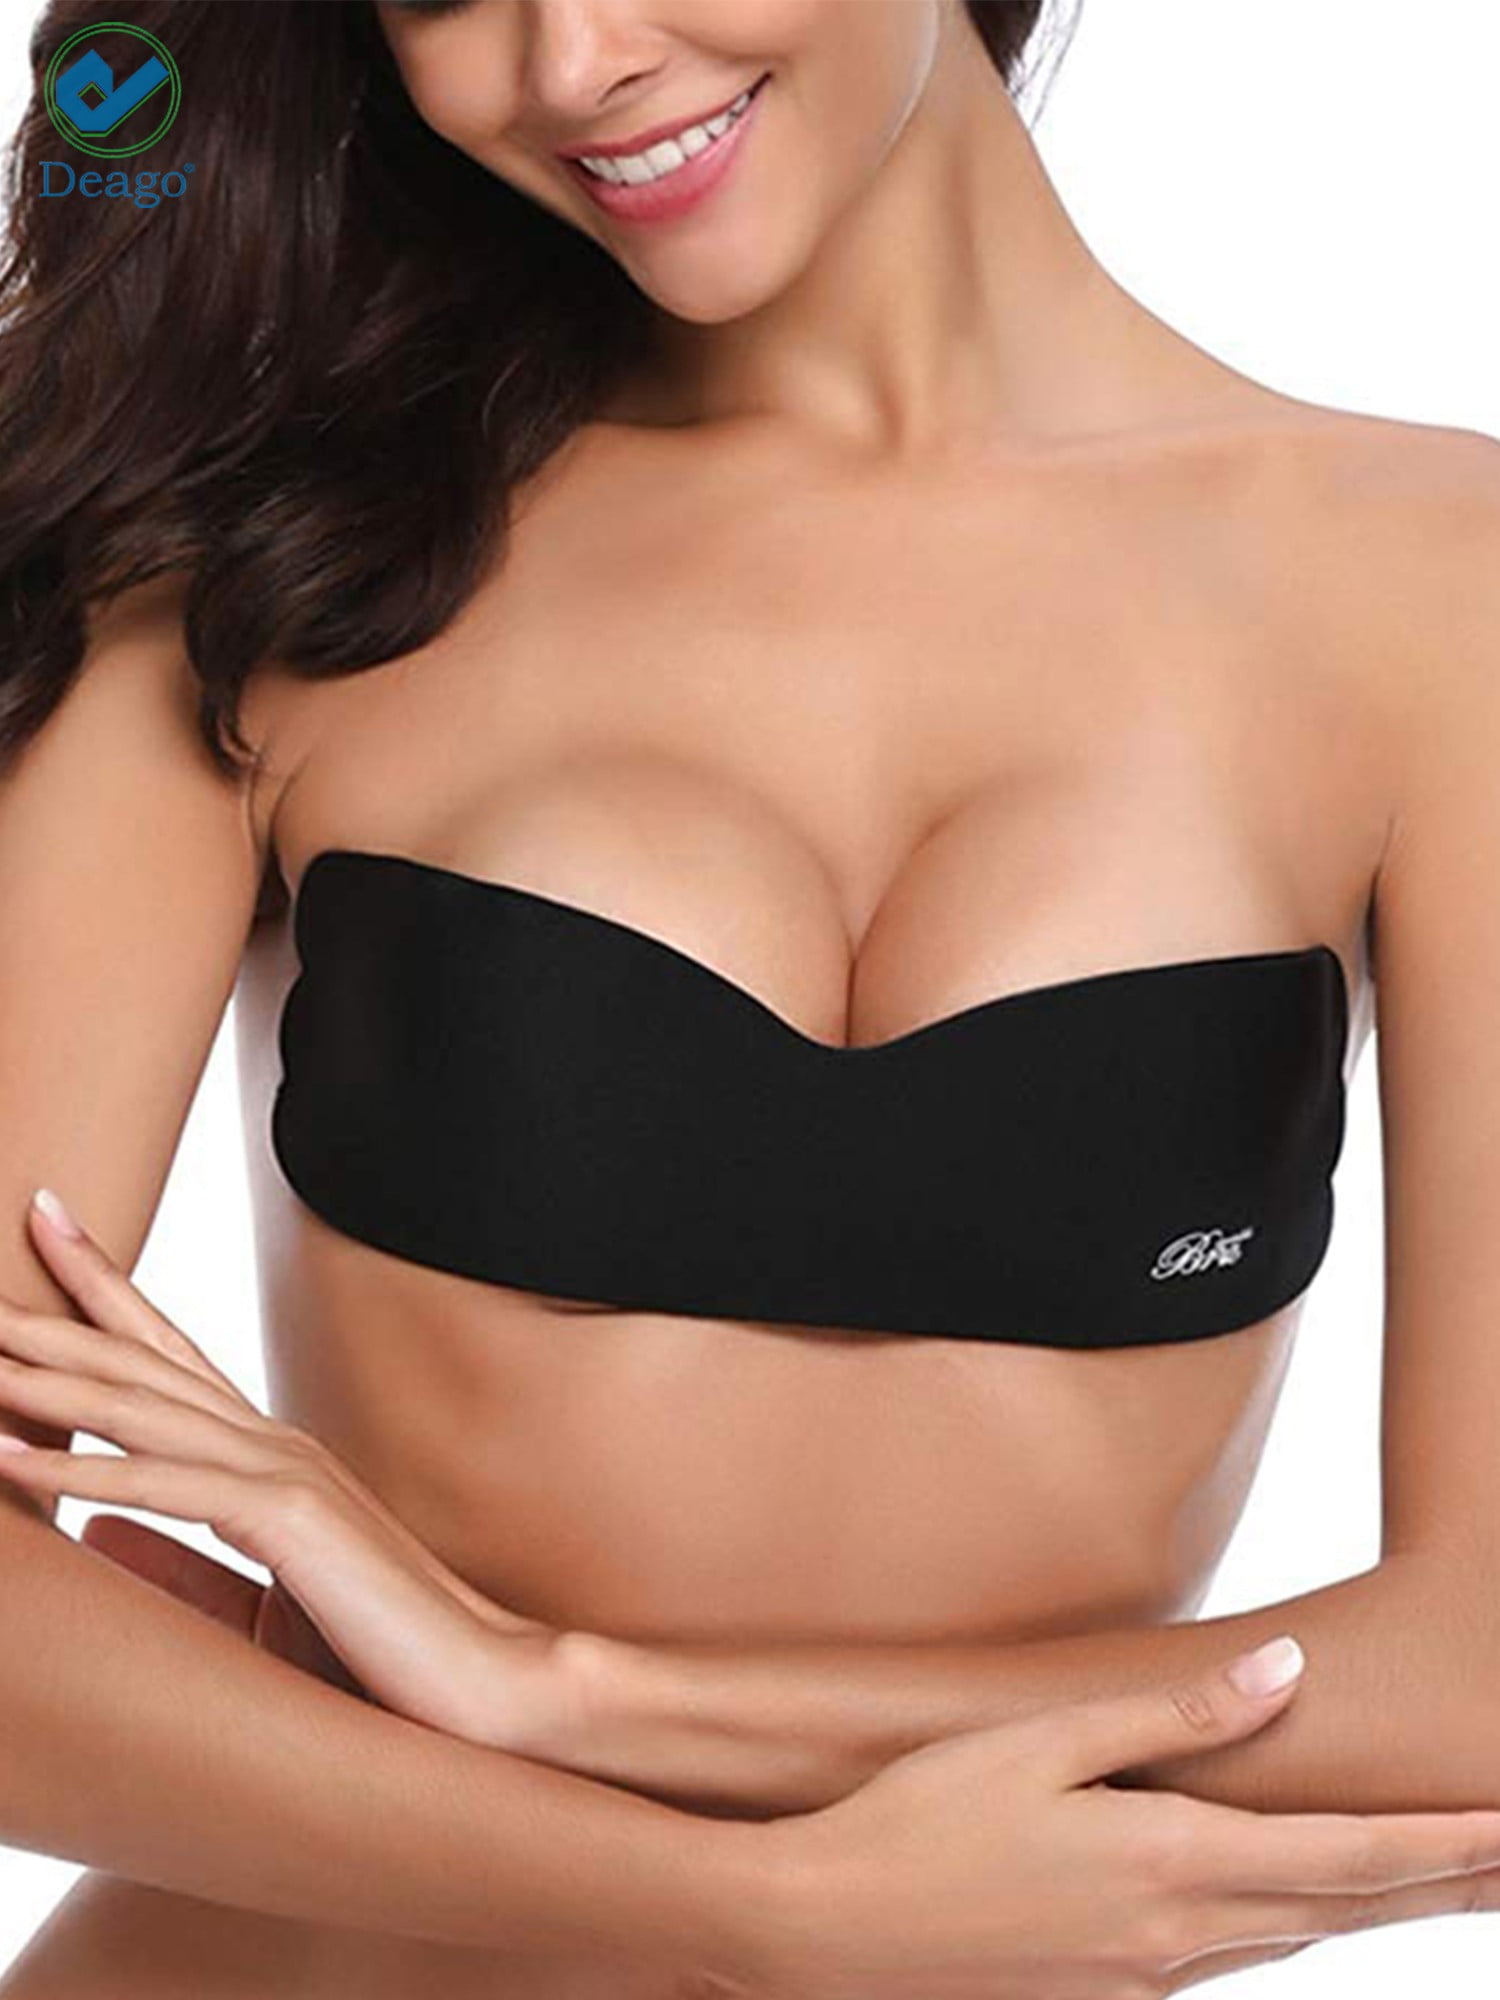 Deago Women's Backless Strapless Push Up Bra Silicone Self Adhesive  Invisible Bras (Cup A/B, Black+Skin) 